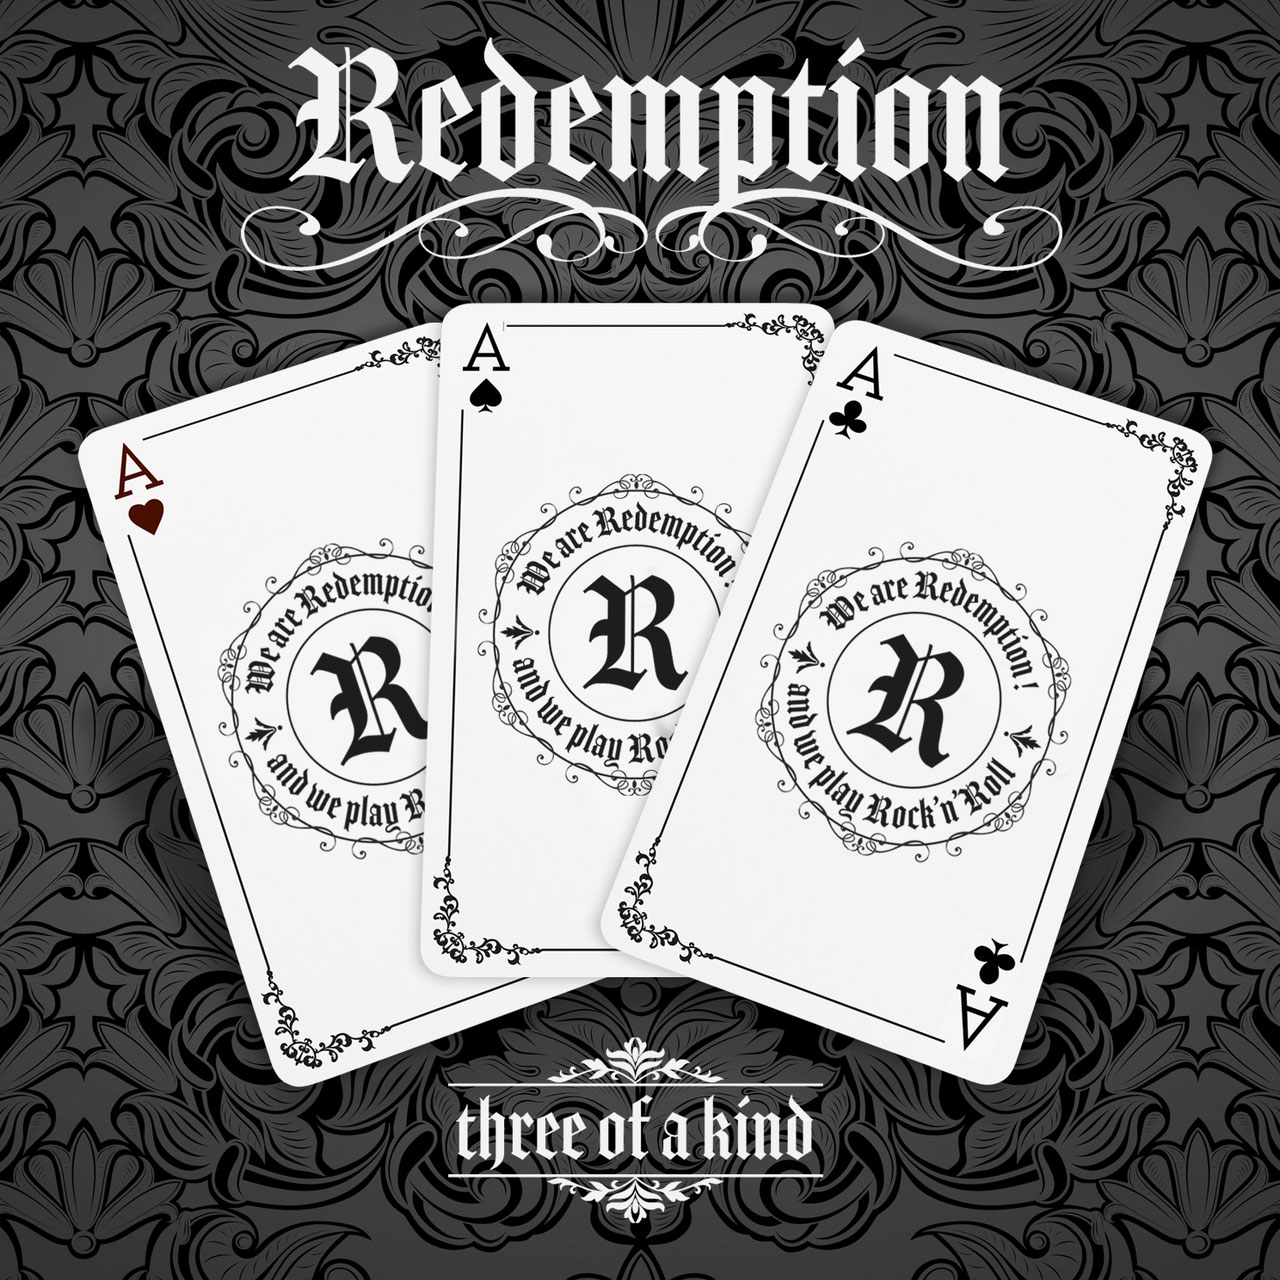 Redemption : We Are Three Of A Kind